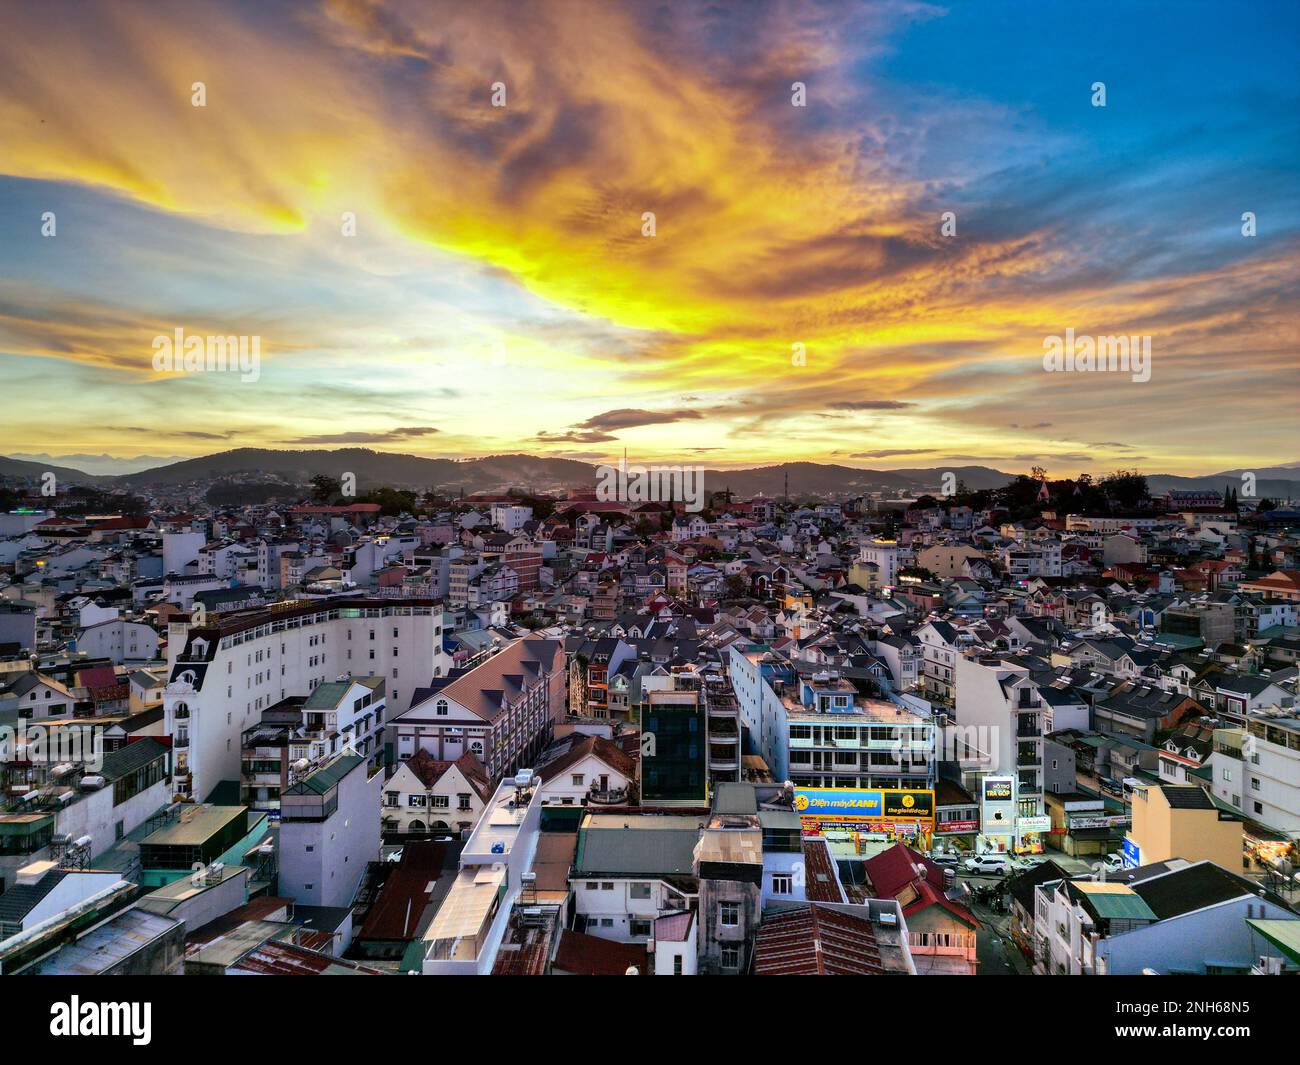 Vibrant Sunset Skyline: HDR Shot of Da Lat City, Vietnam with Mesmerizing Blend of Colors between Cityscape and Sky at Dusk Stock Photo